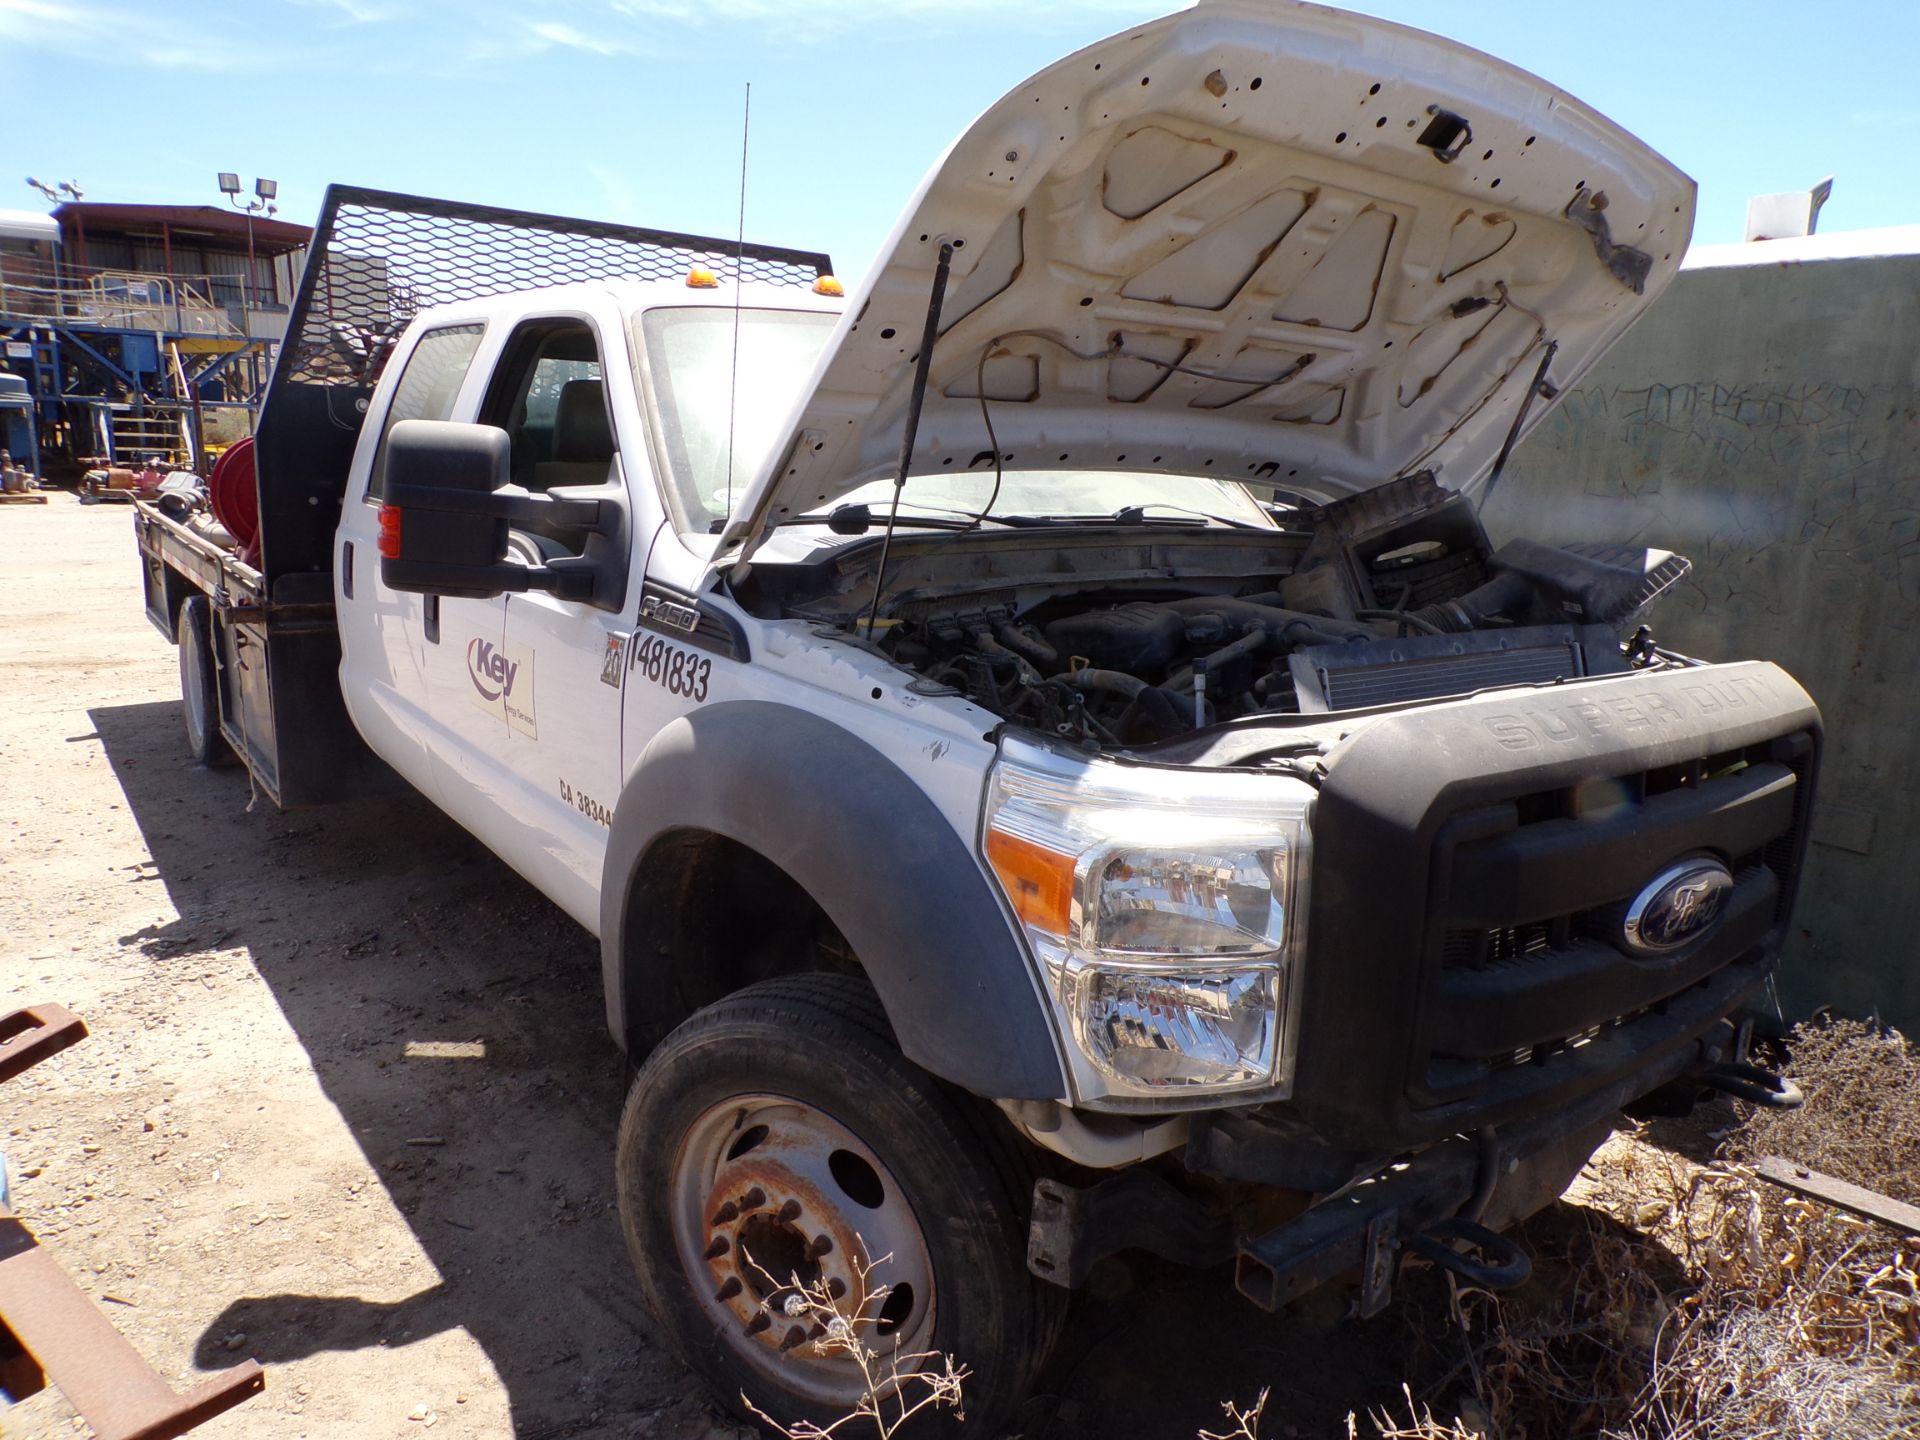 Located in YARD 14 - Bakersfield, CA (1481833) (X) 2012 FORD F450 2X4 CREW CAB PICKUP, VIN- - Image 4 of 7